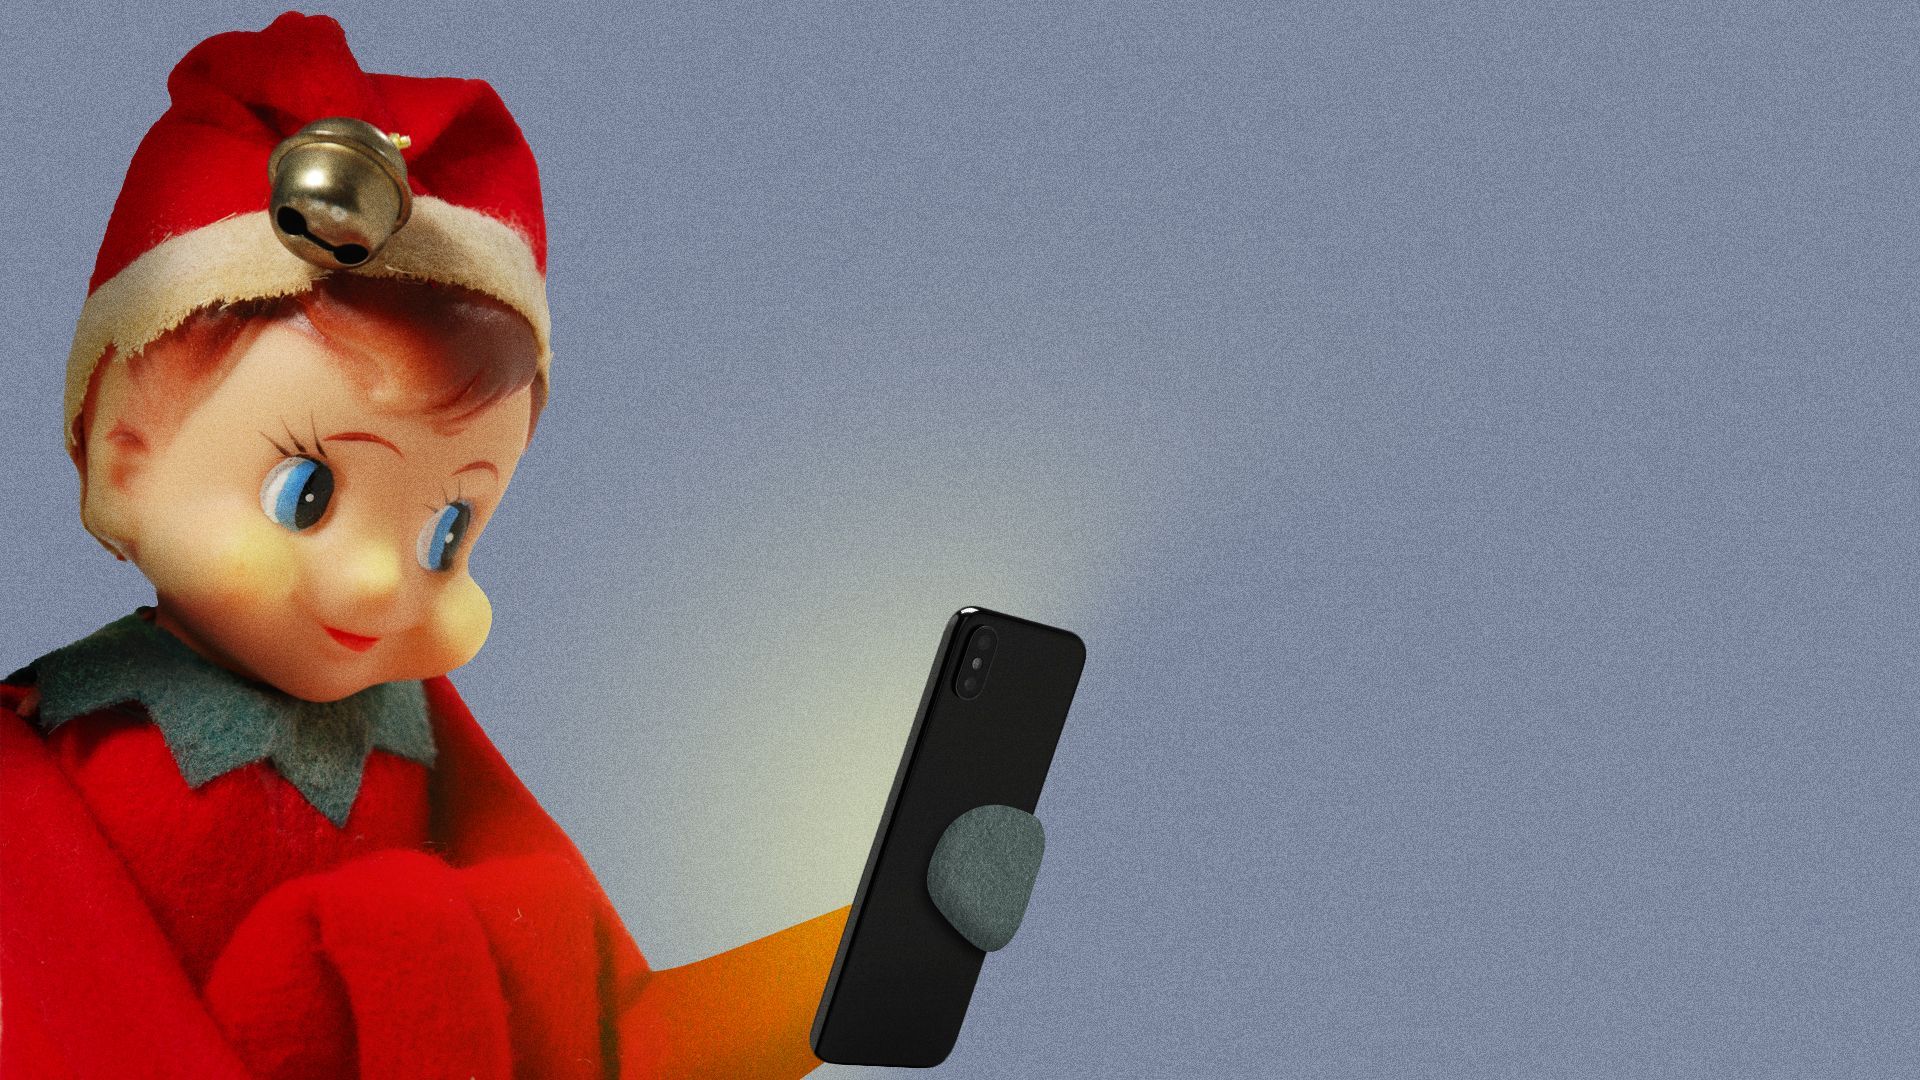 Illustration of the elf on the shelf reading its cell phone.